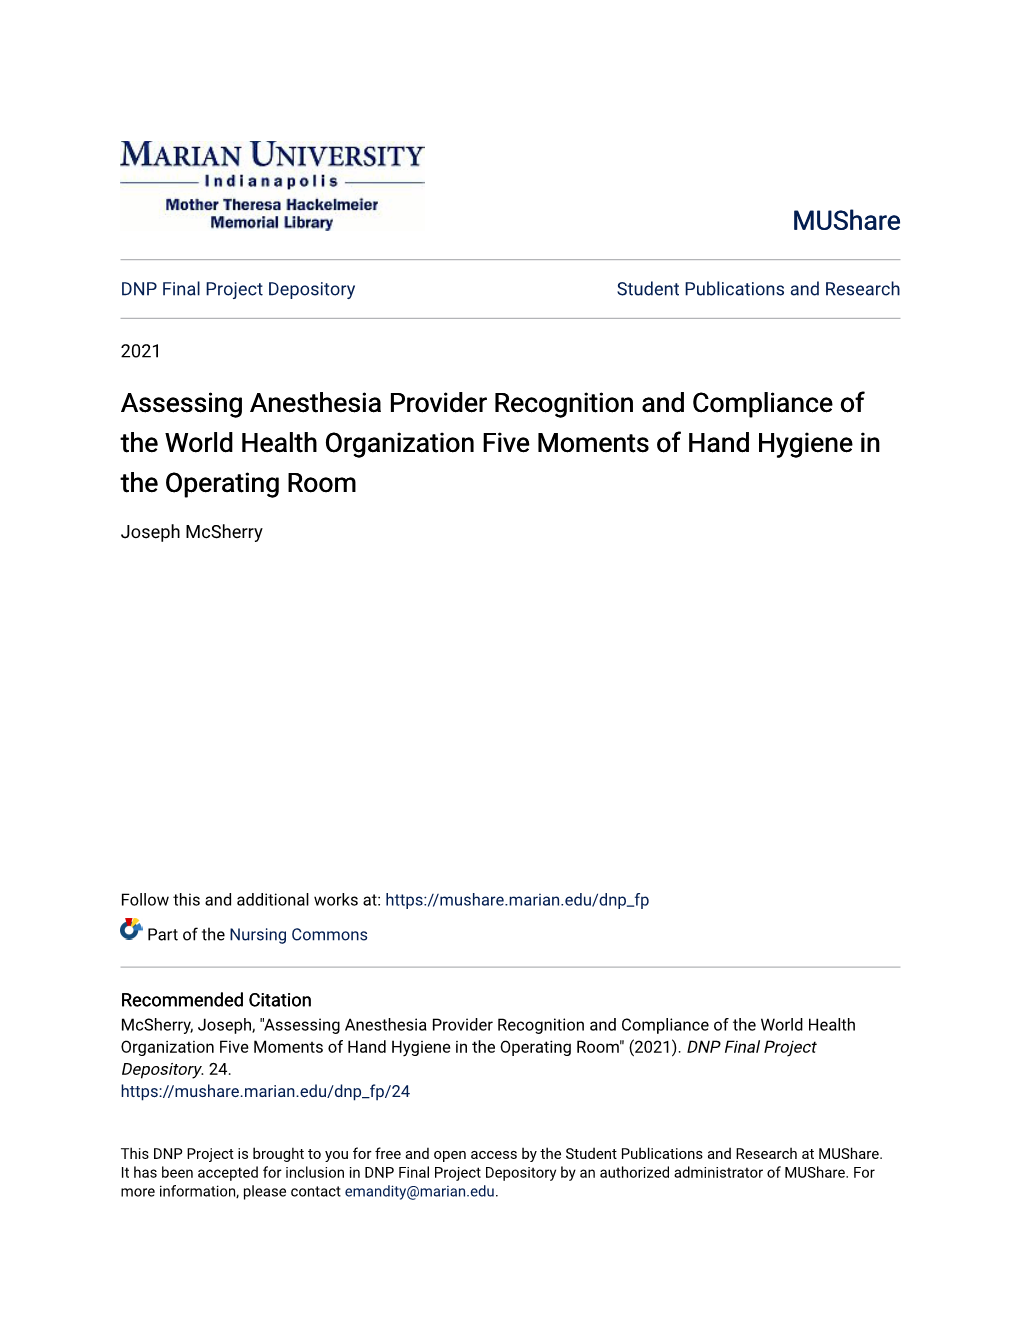 Assessing Anesthesia Provider Recognition and Compliance of the World Health Organization Five Moments of Hand Hygiene in the Operating Room